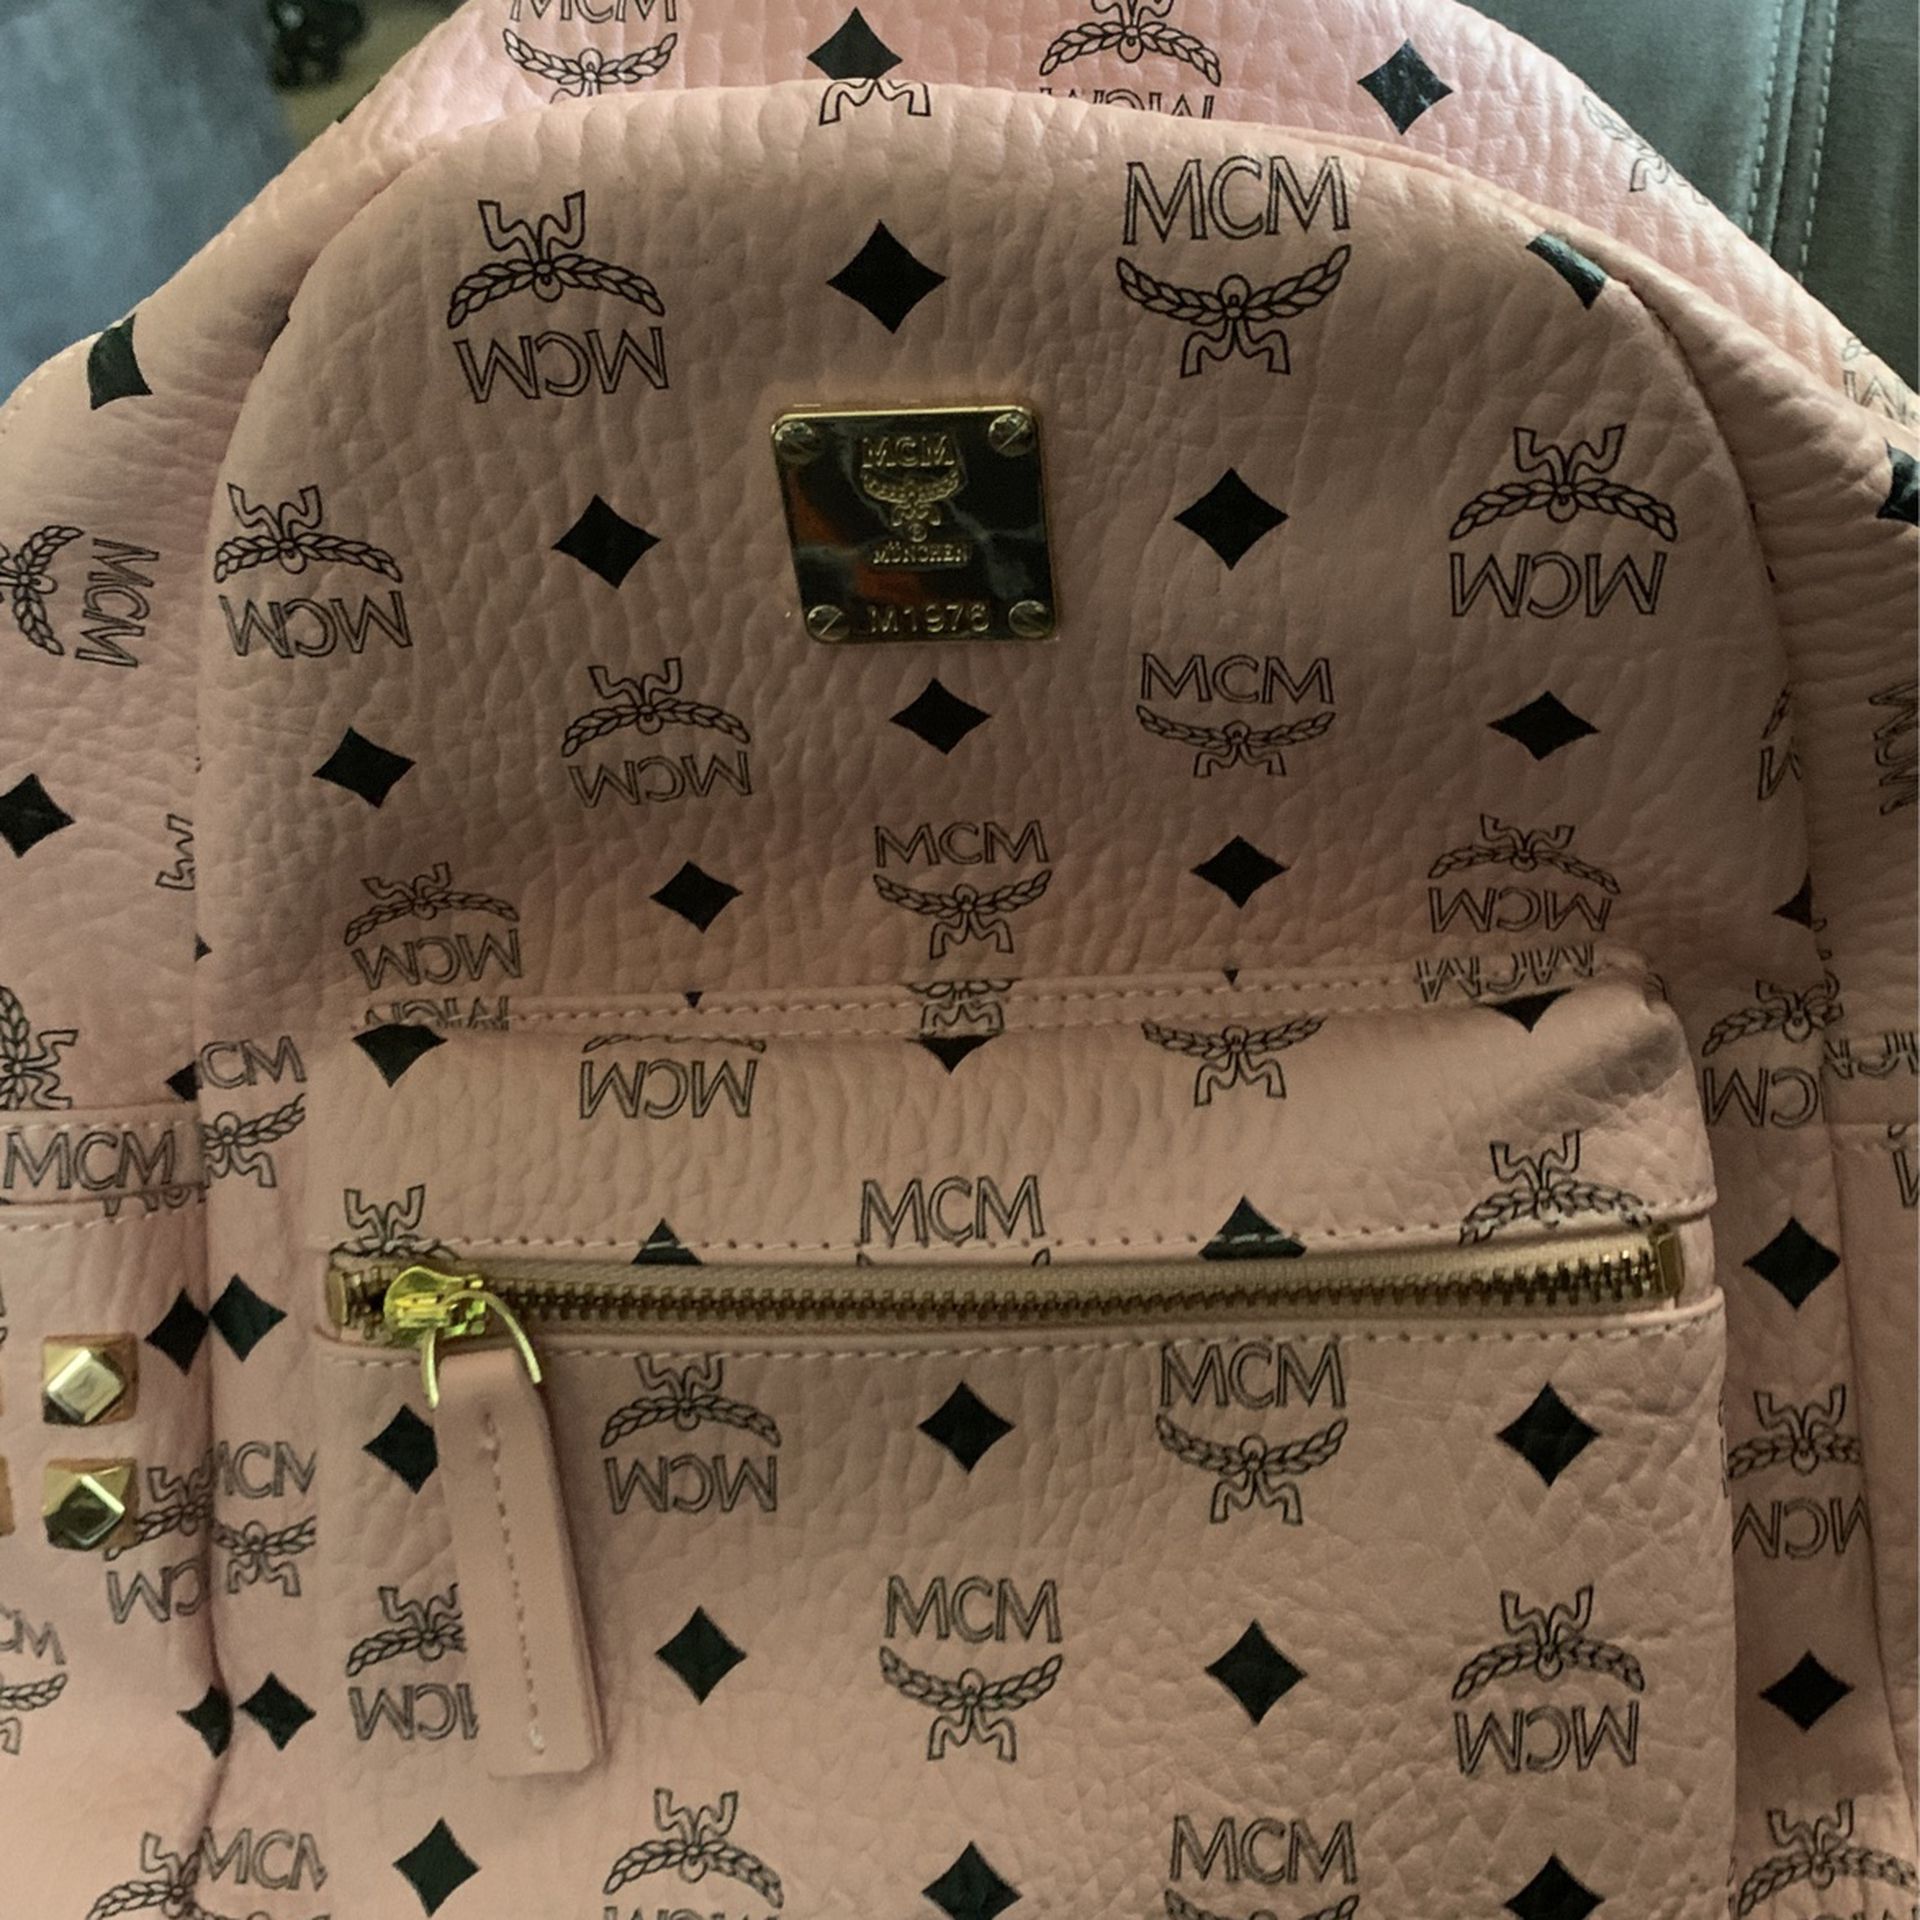 Mcm backpack for Sale in Chicago, IL - OfferUp